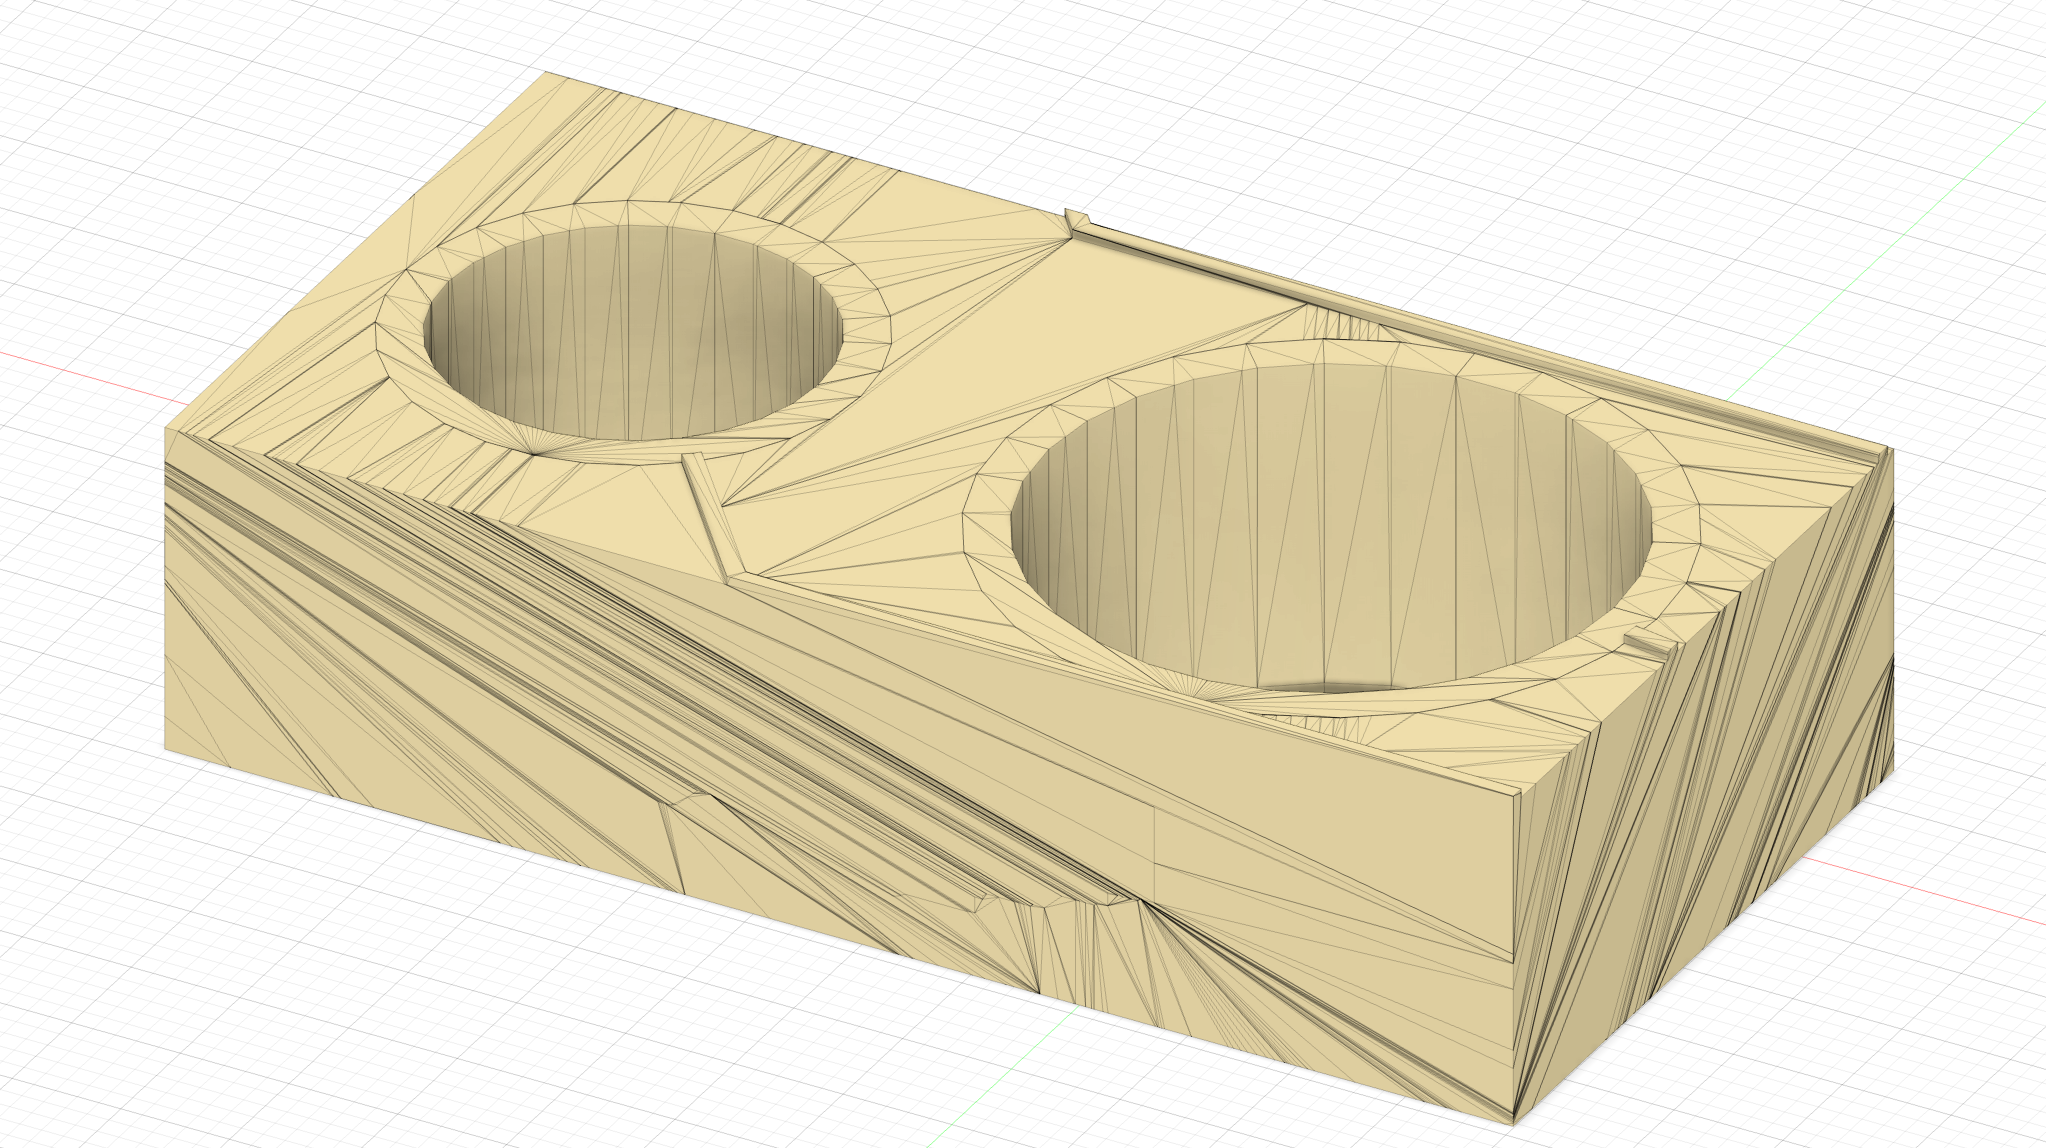 The cut-out test section of a socket organizer in Autodesk Fusion